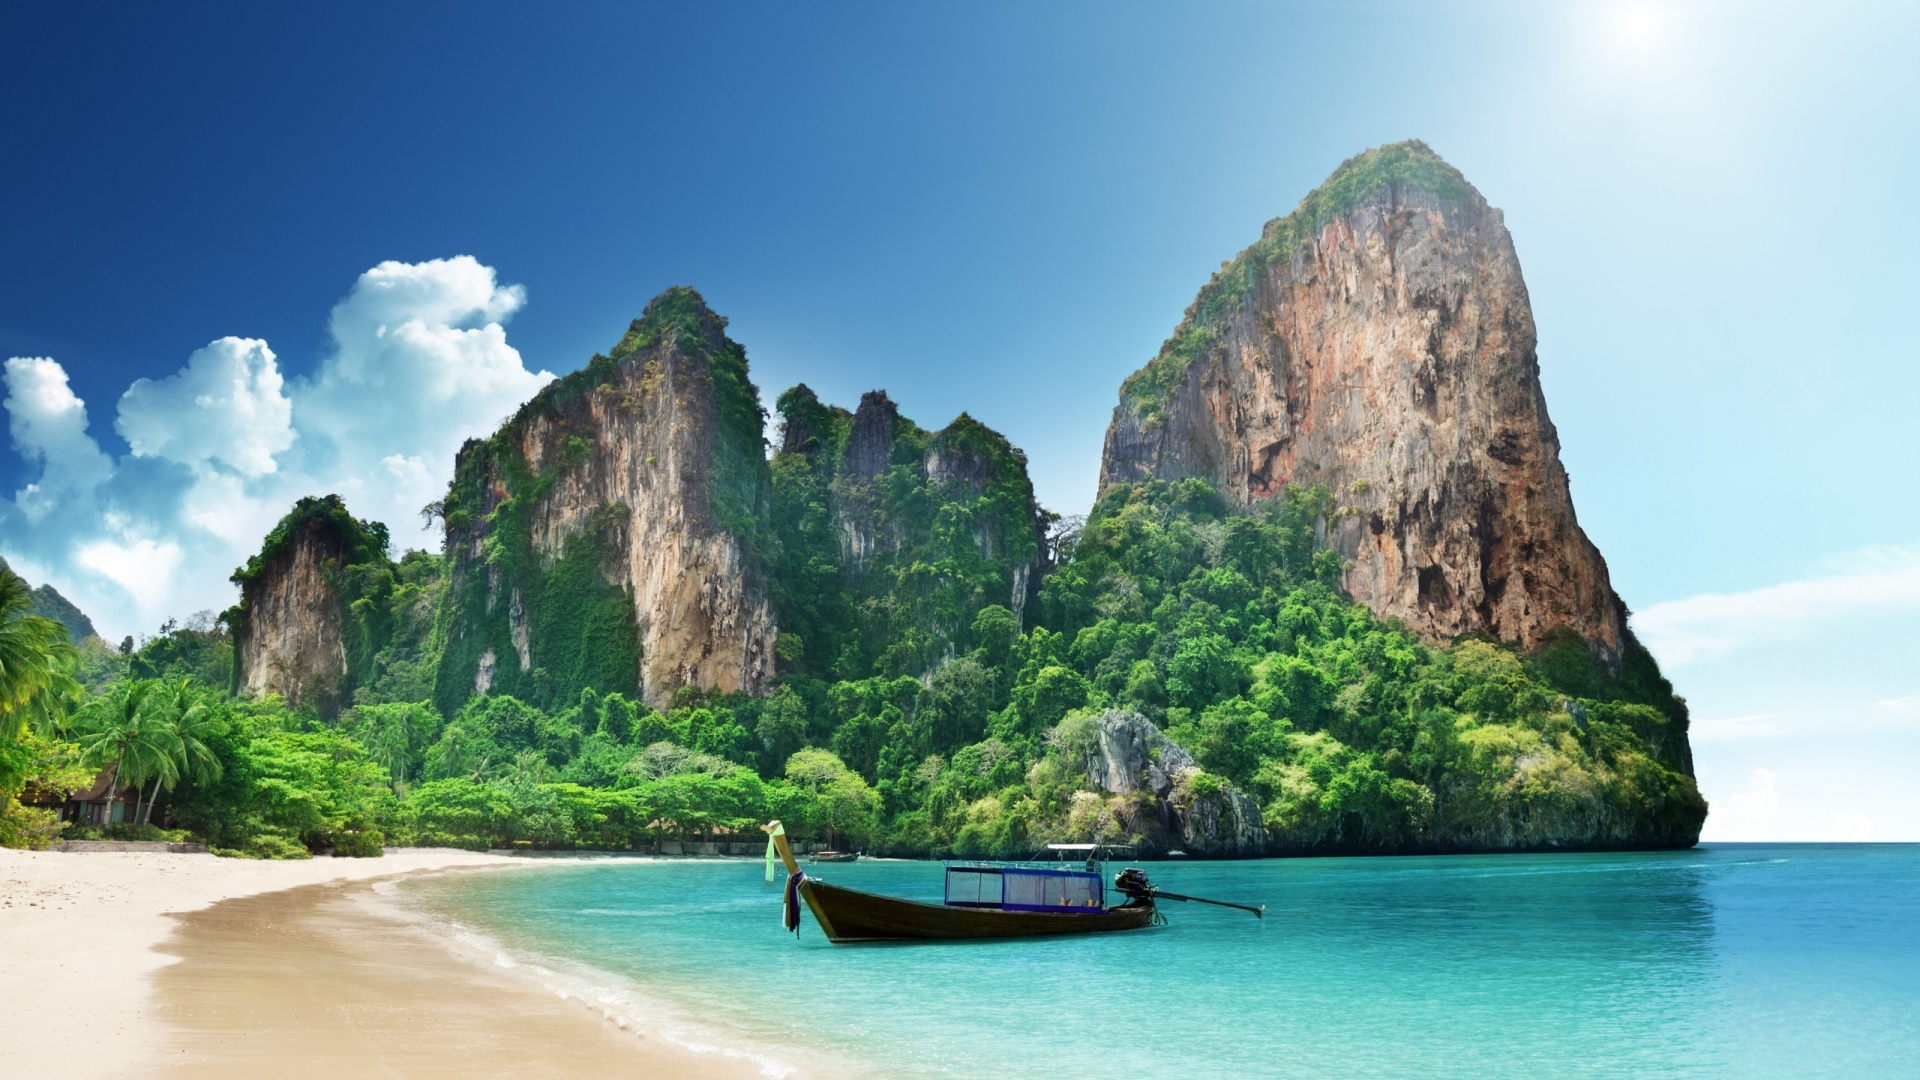 Superb View from Thailand for 1920 x 1080 HDTV 1080p resolution